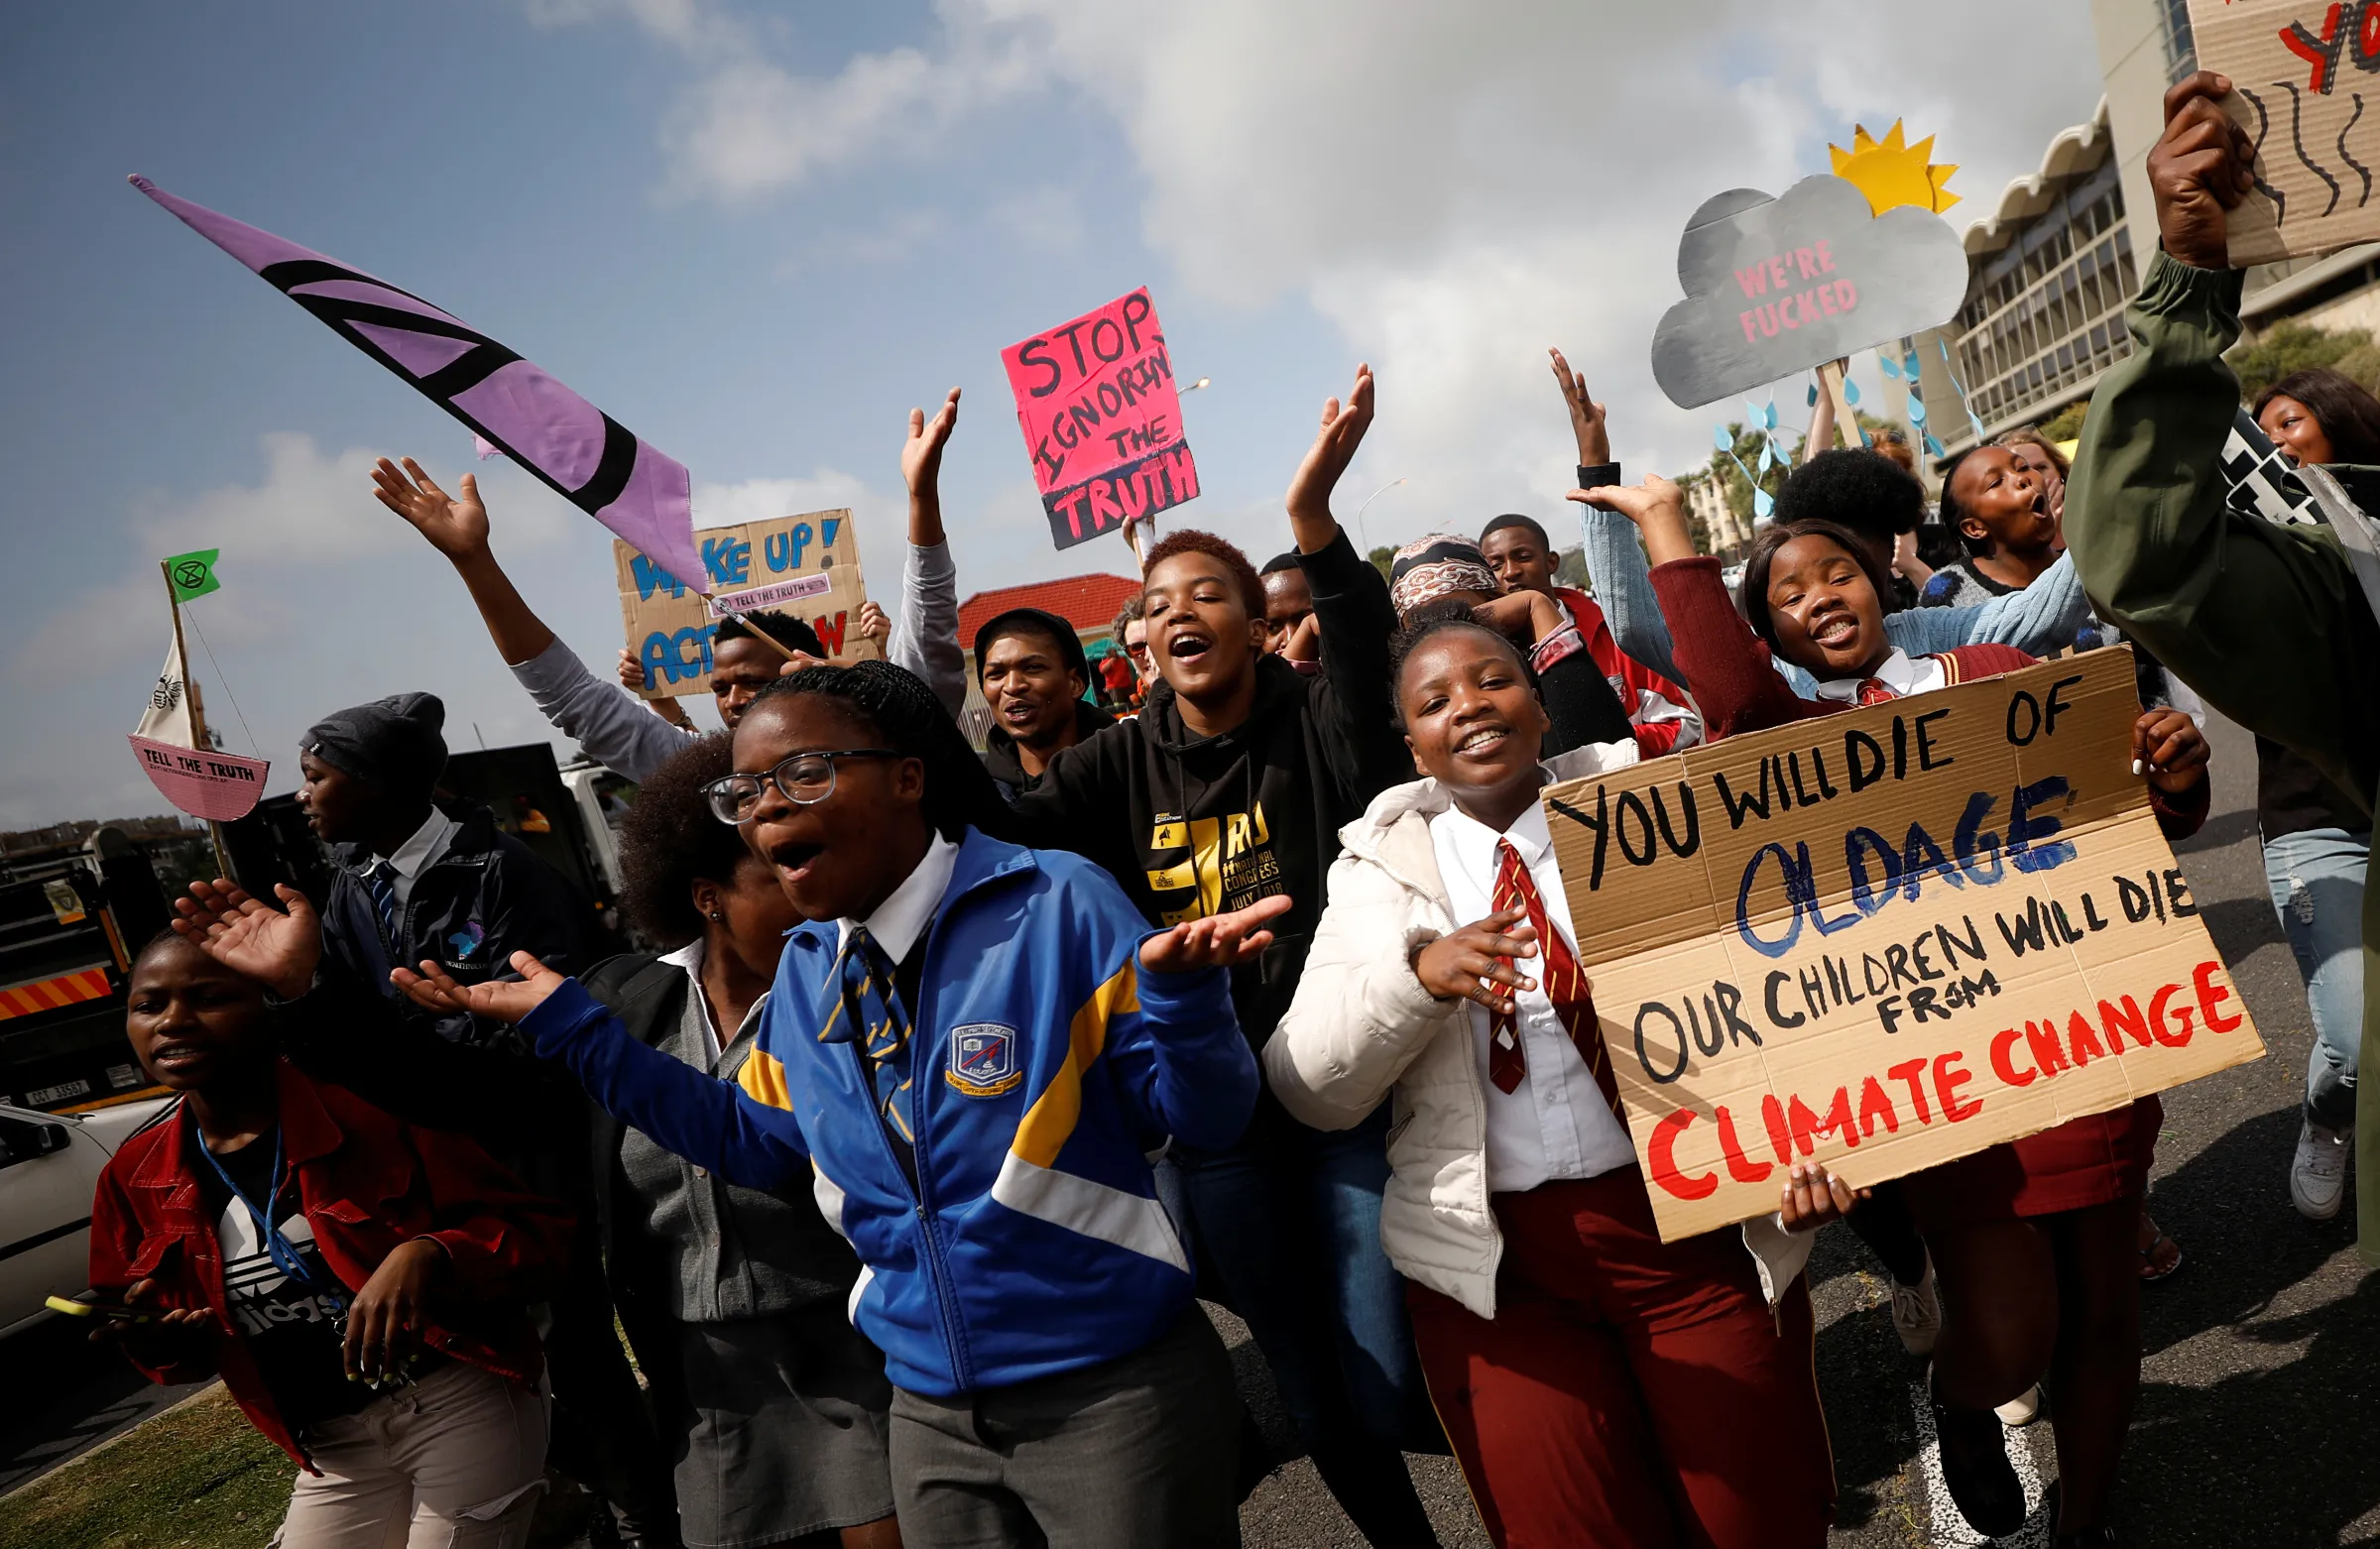 Young activists march as part of the Global Climate Strike of the movement Fridays for Future, in Cape Town, South Africa September 20, 2019